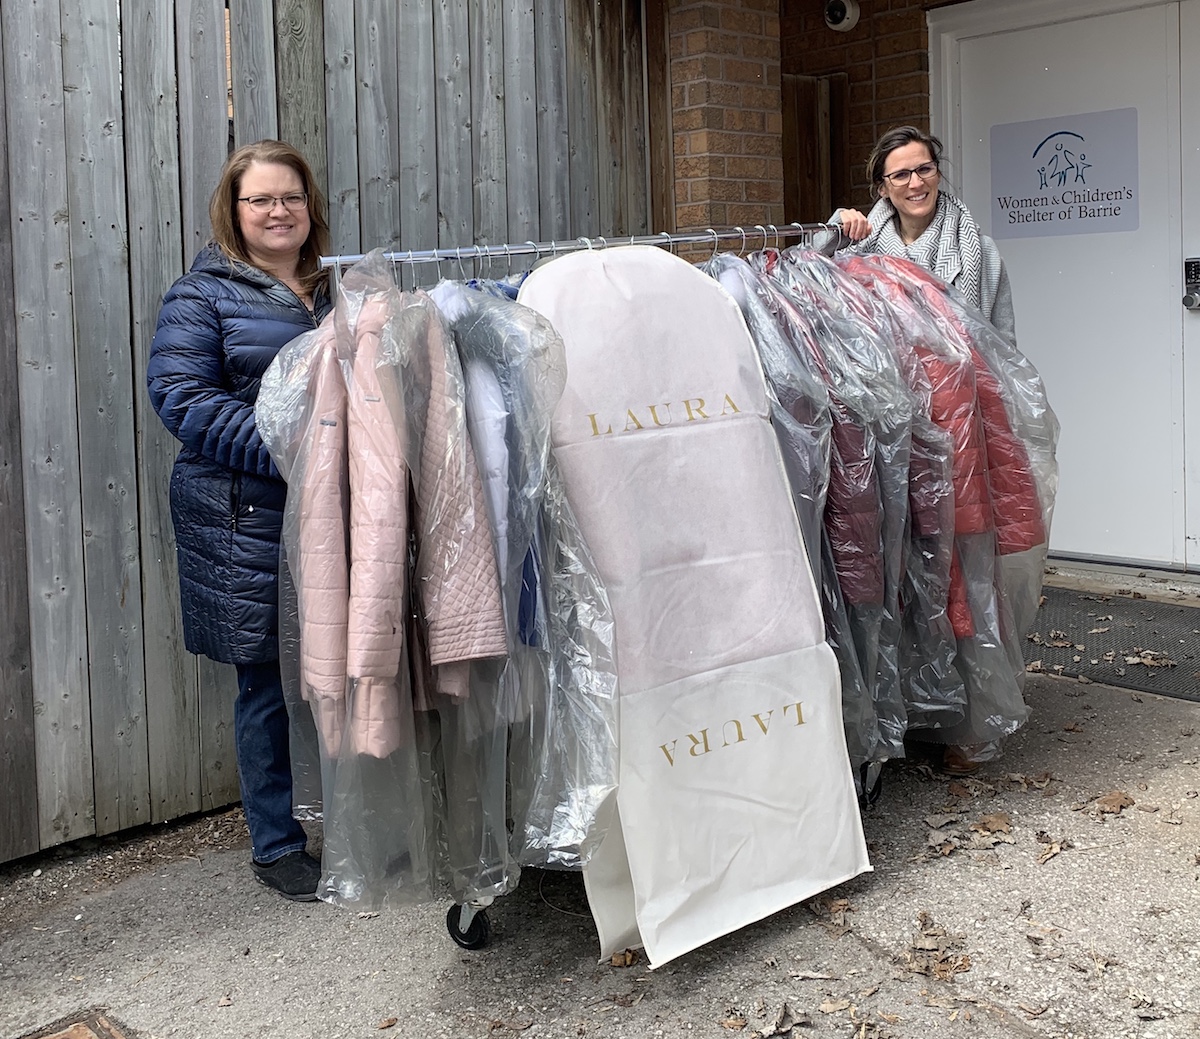 Two women with a rack of donated Laura coats at a community organization.